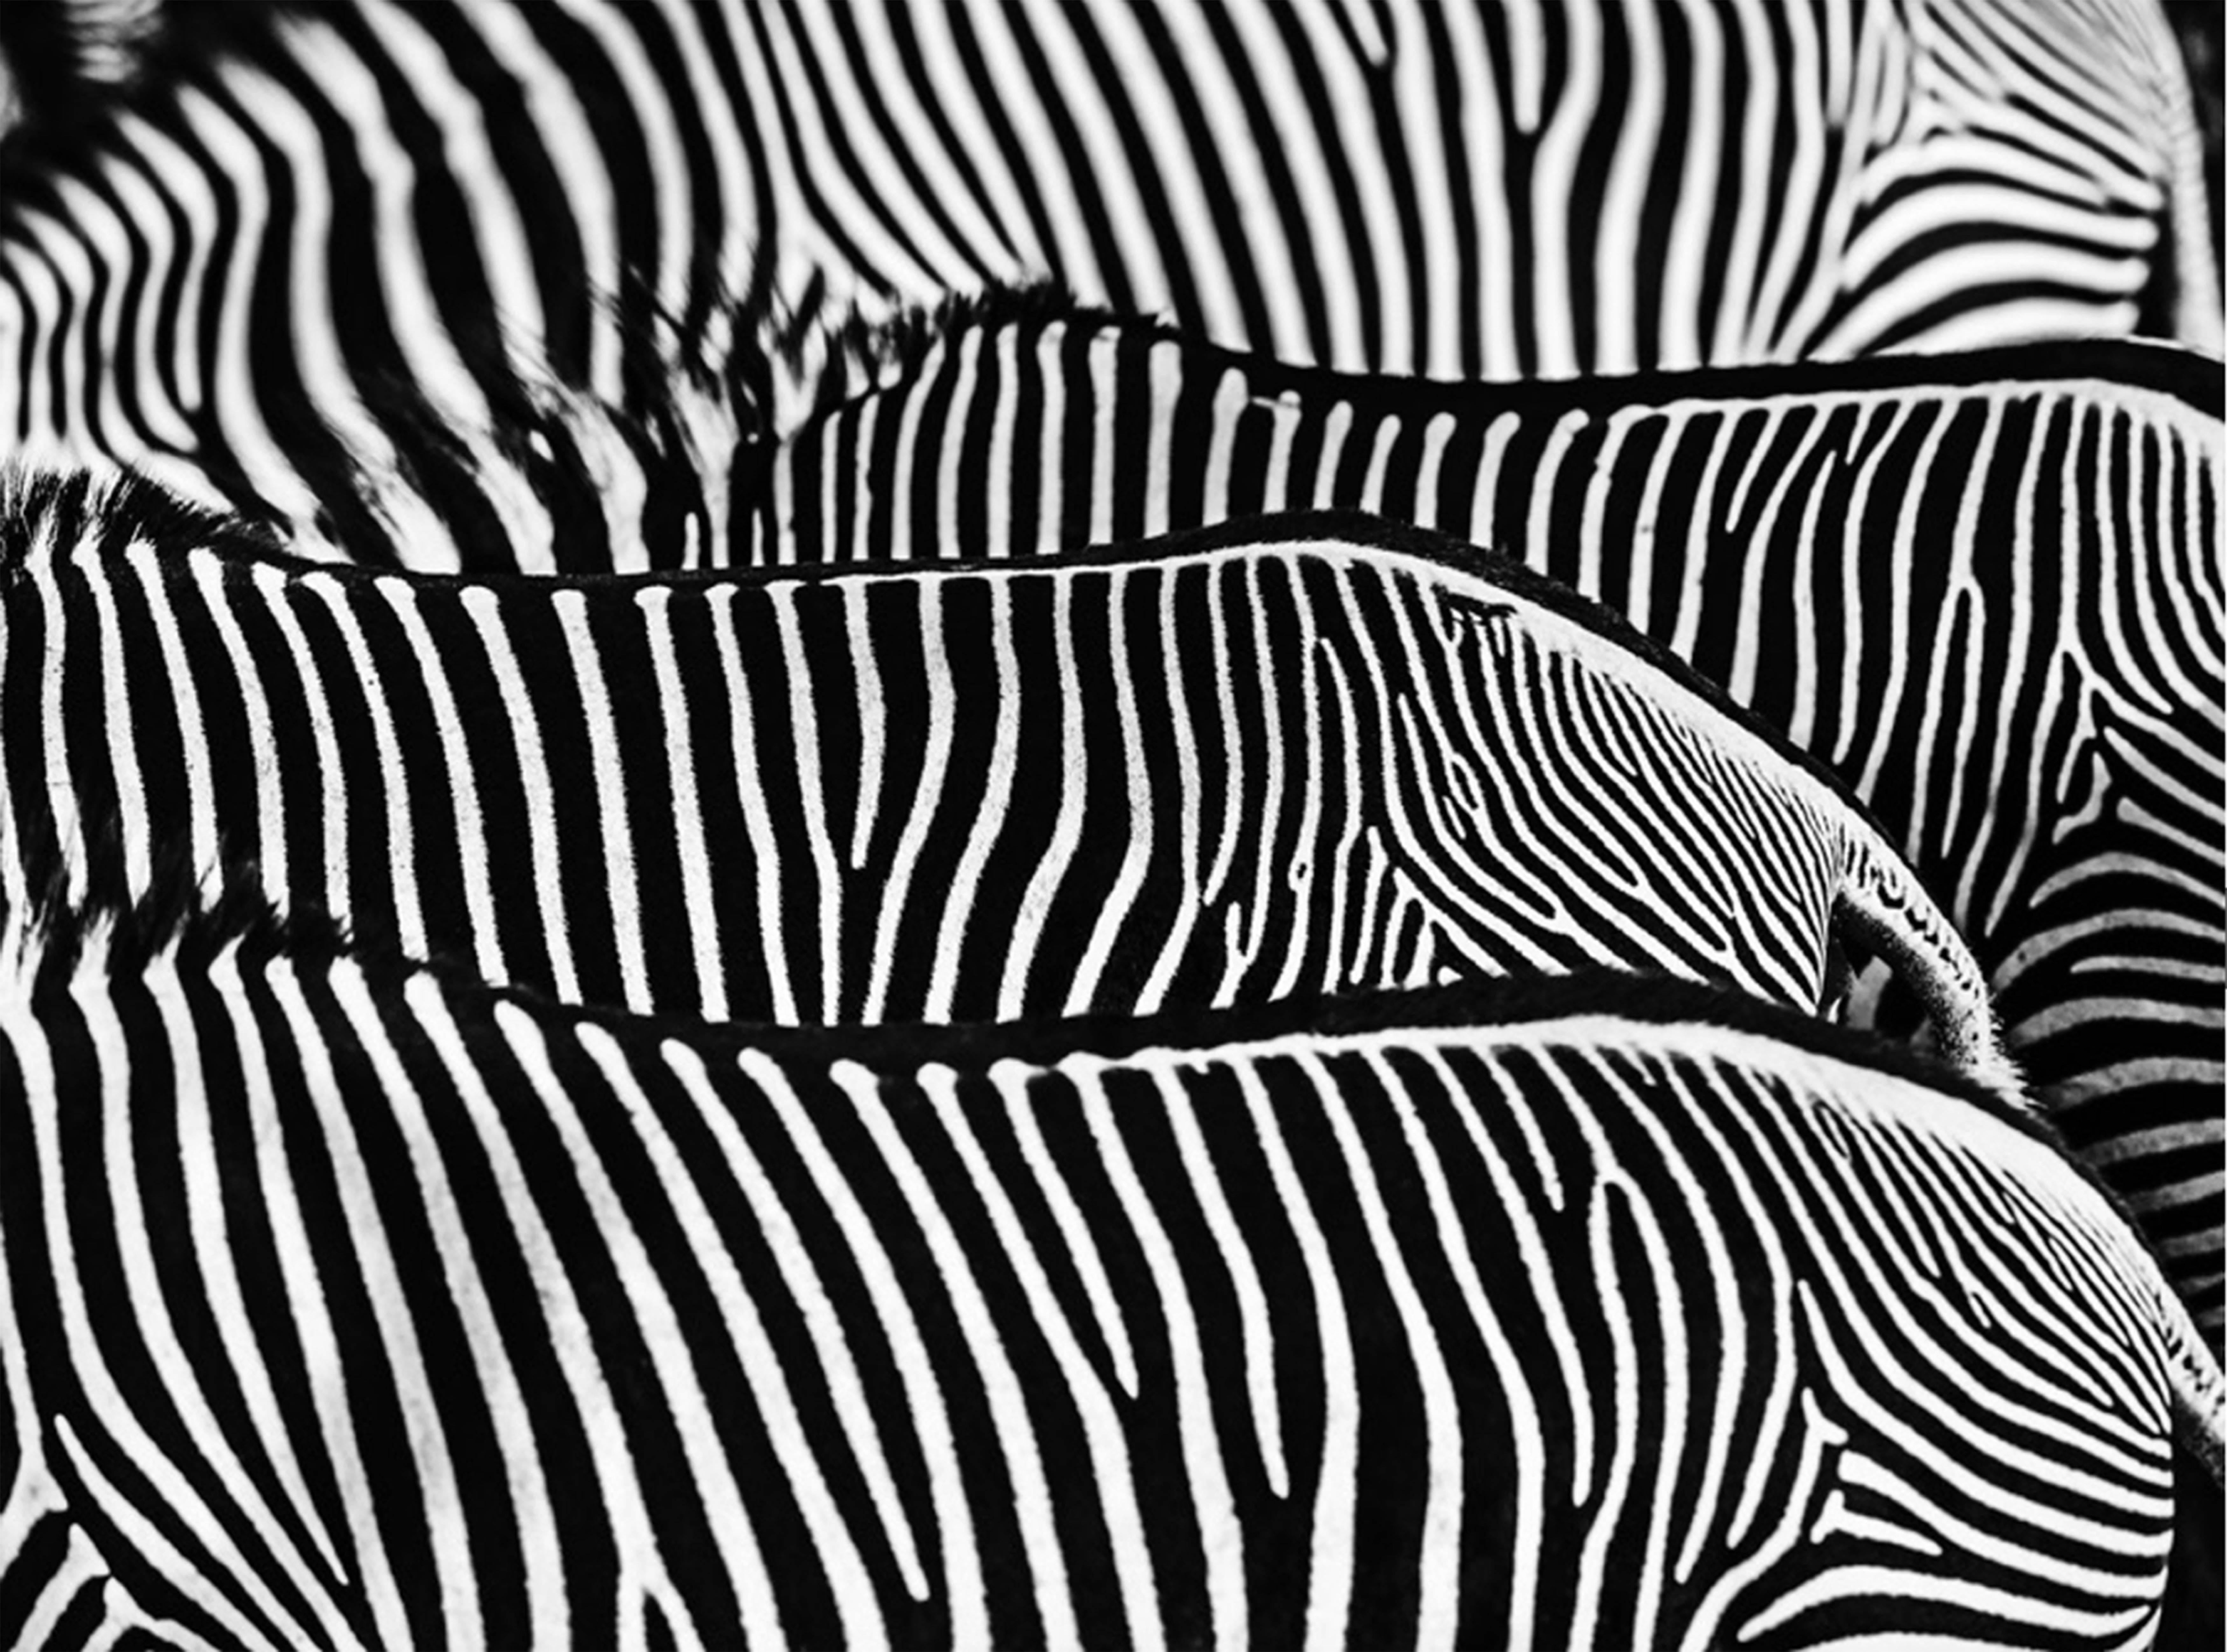 David Yarrow Black and White Photograph - The Factory 